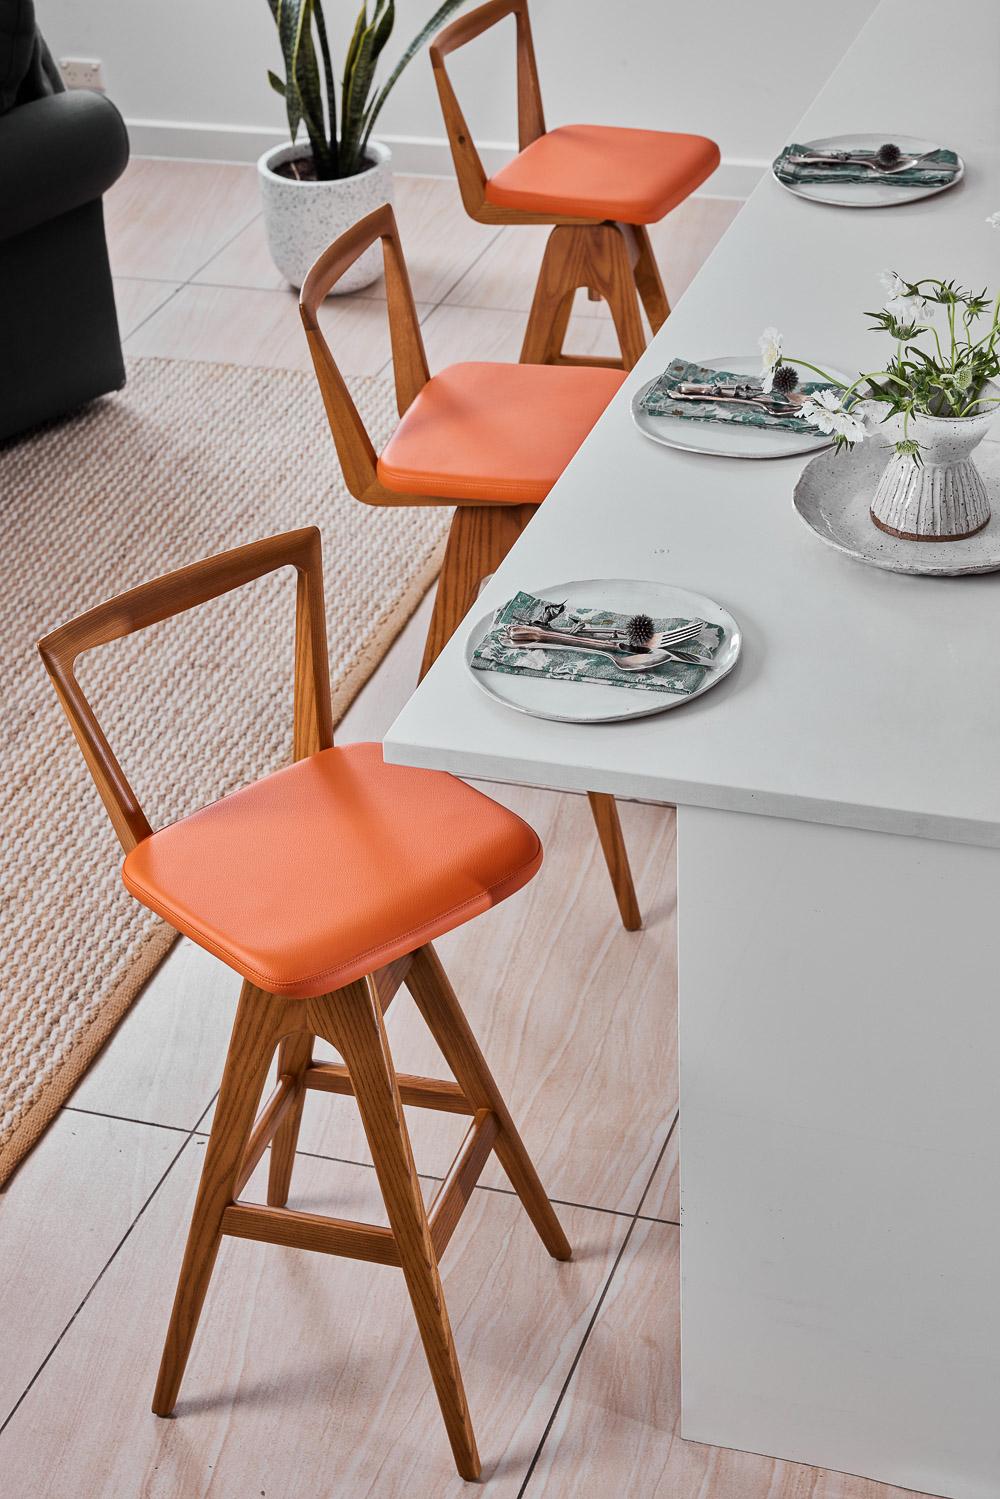 stools are light brown